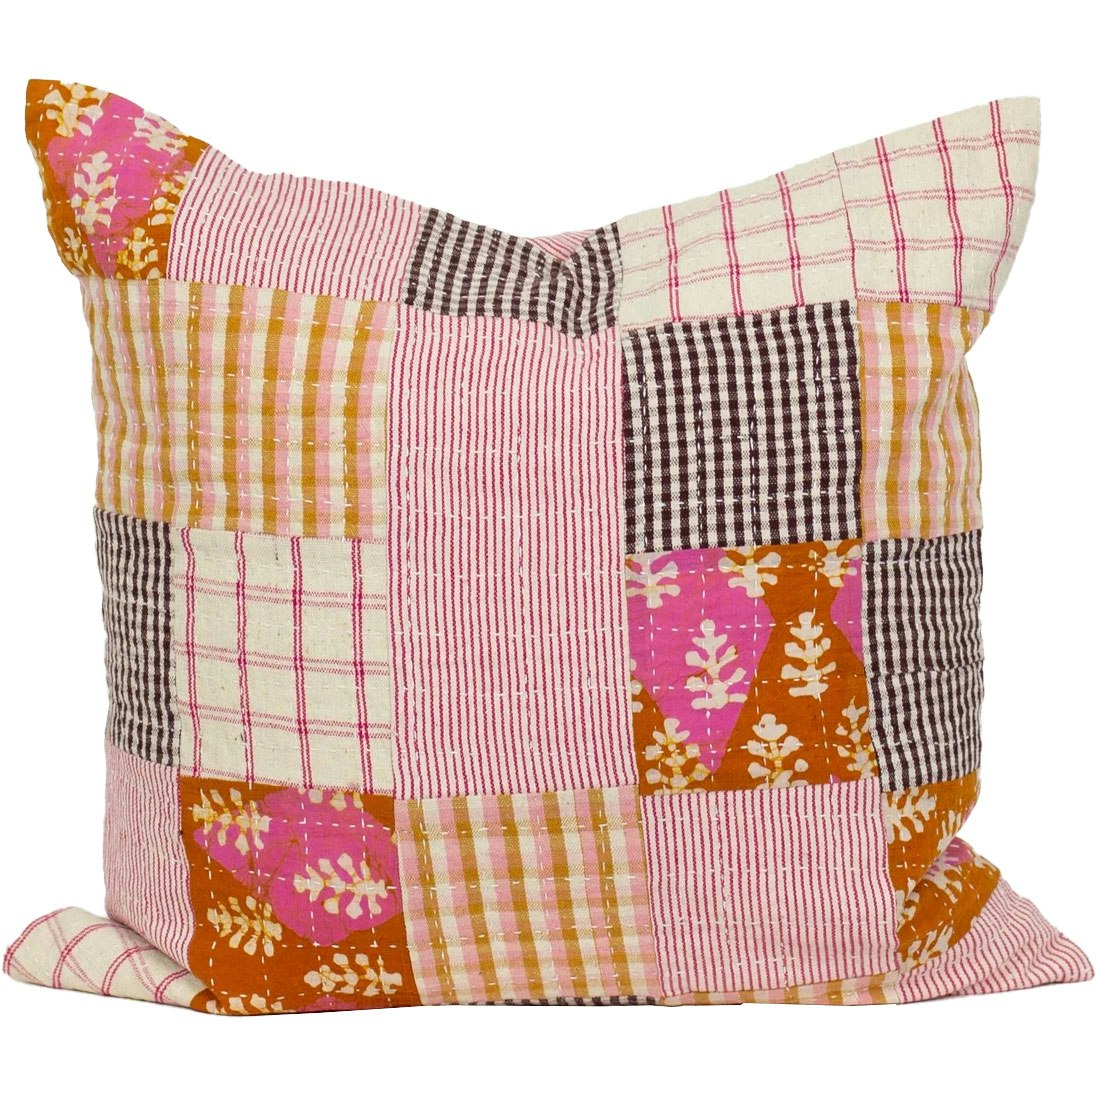 Patch Cushion Cover 50x50 cm, Pink